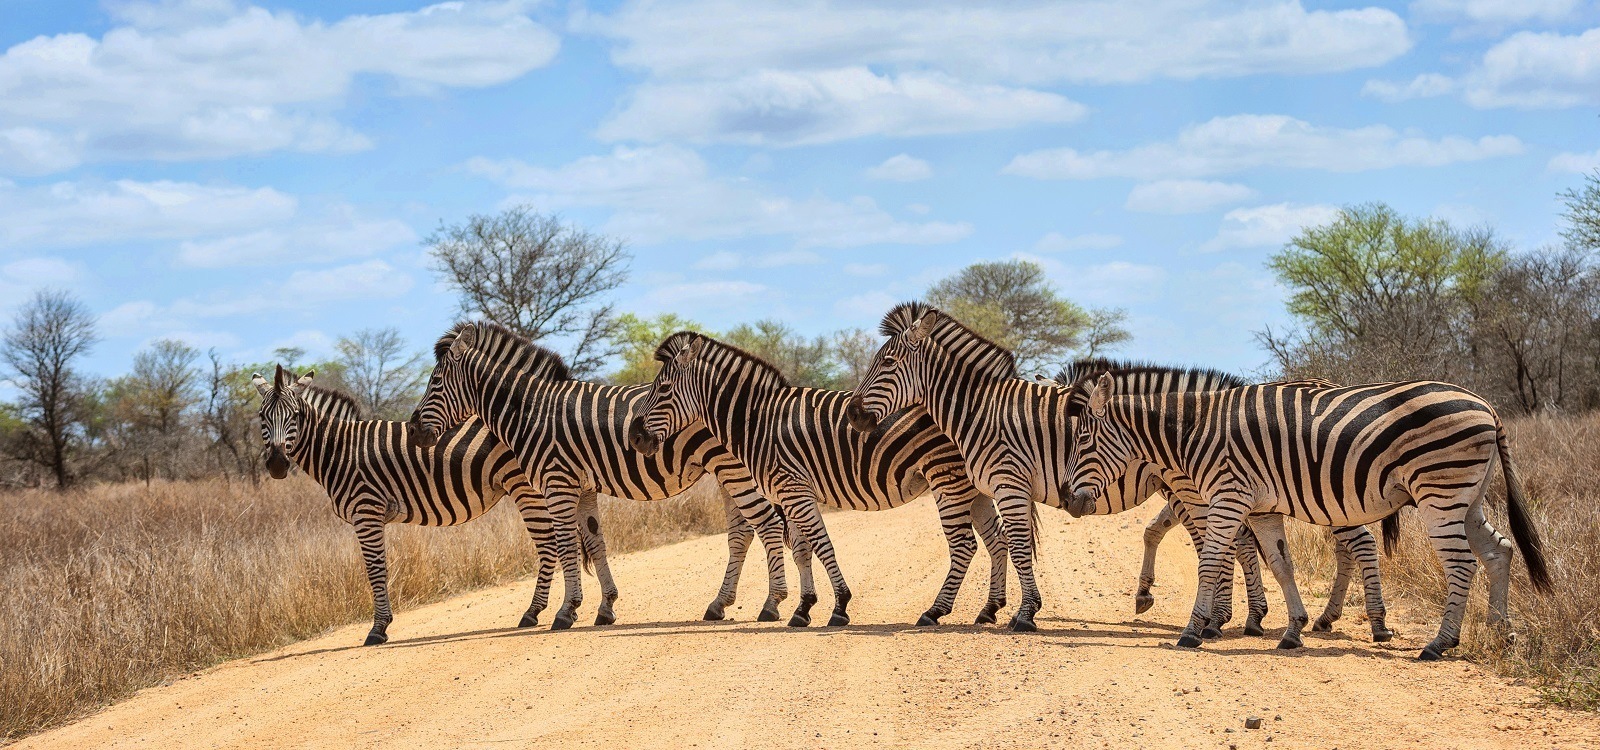 Kruger National Park Safari I Everything to know Discover Africa Safaris